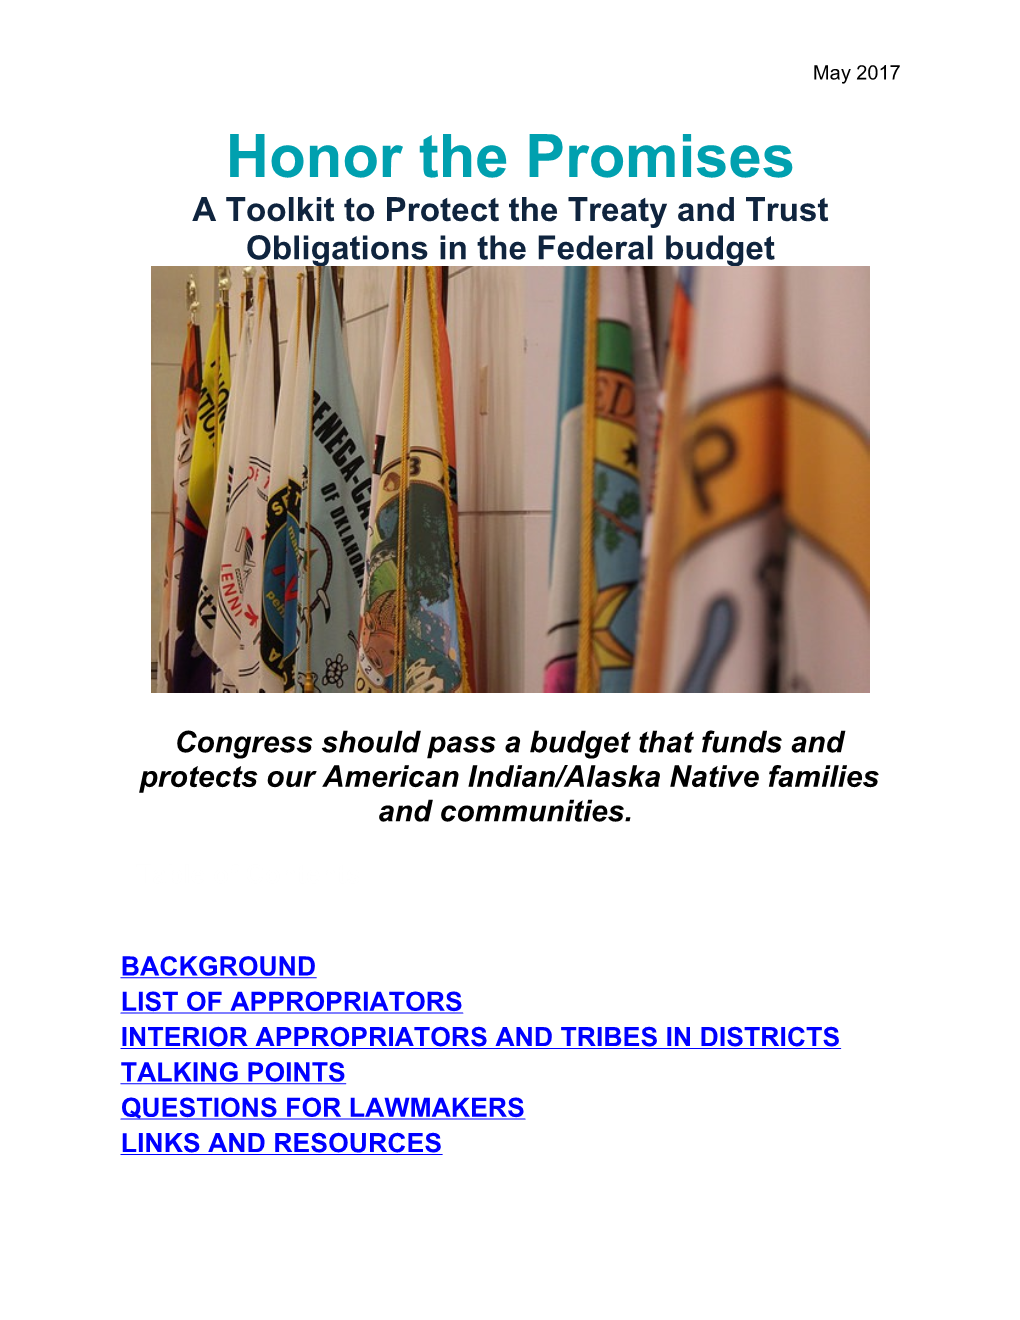 A Toolkittoprotect the Treaty and Trust Obligations in the Federal Budget